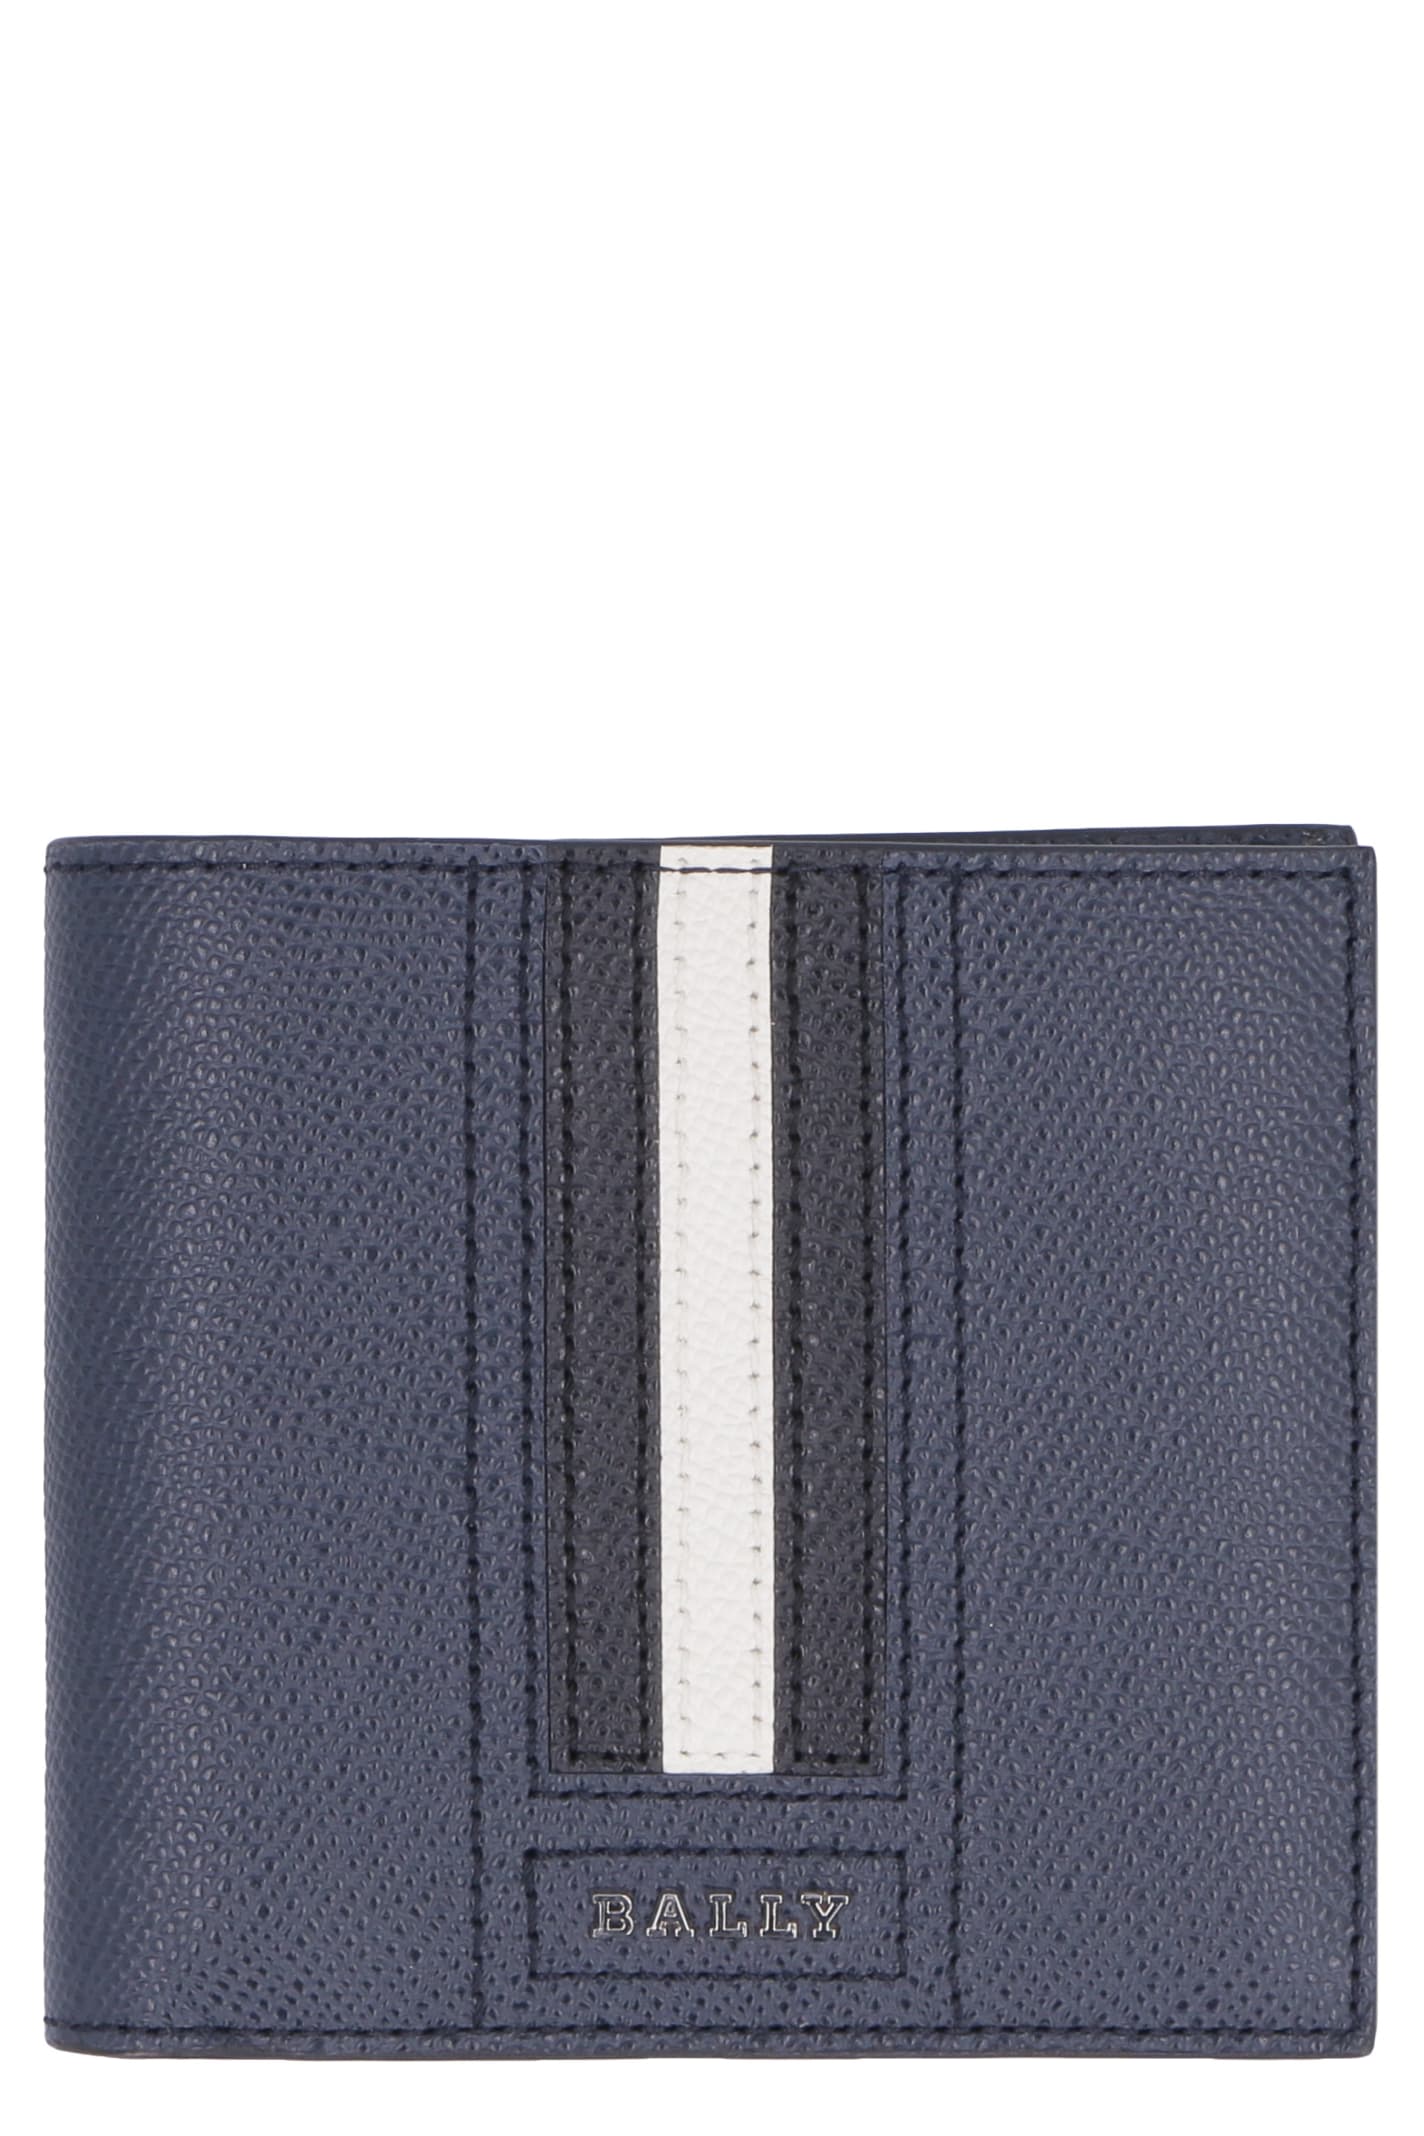 Bally Trasai Leather Flap-over Wallet